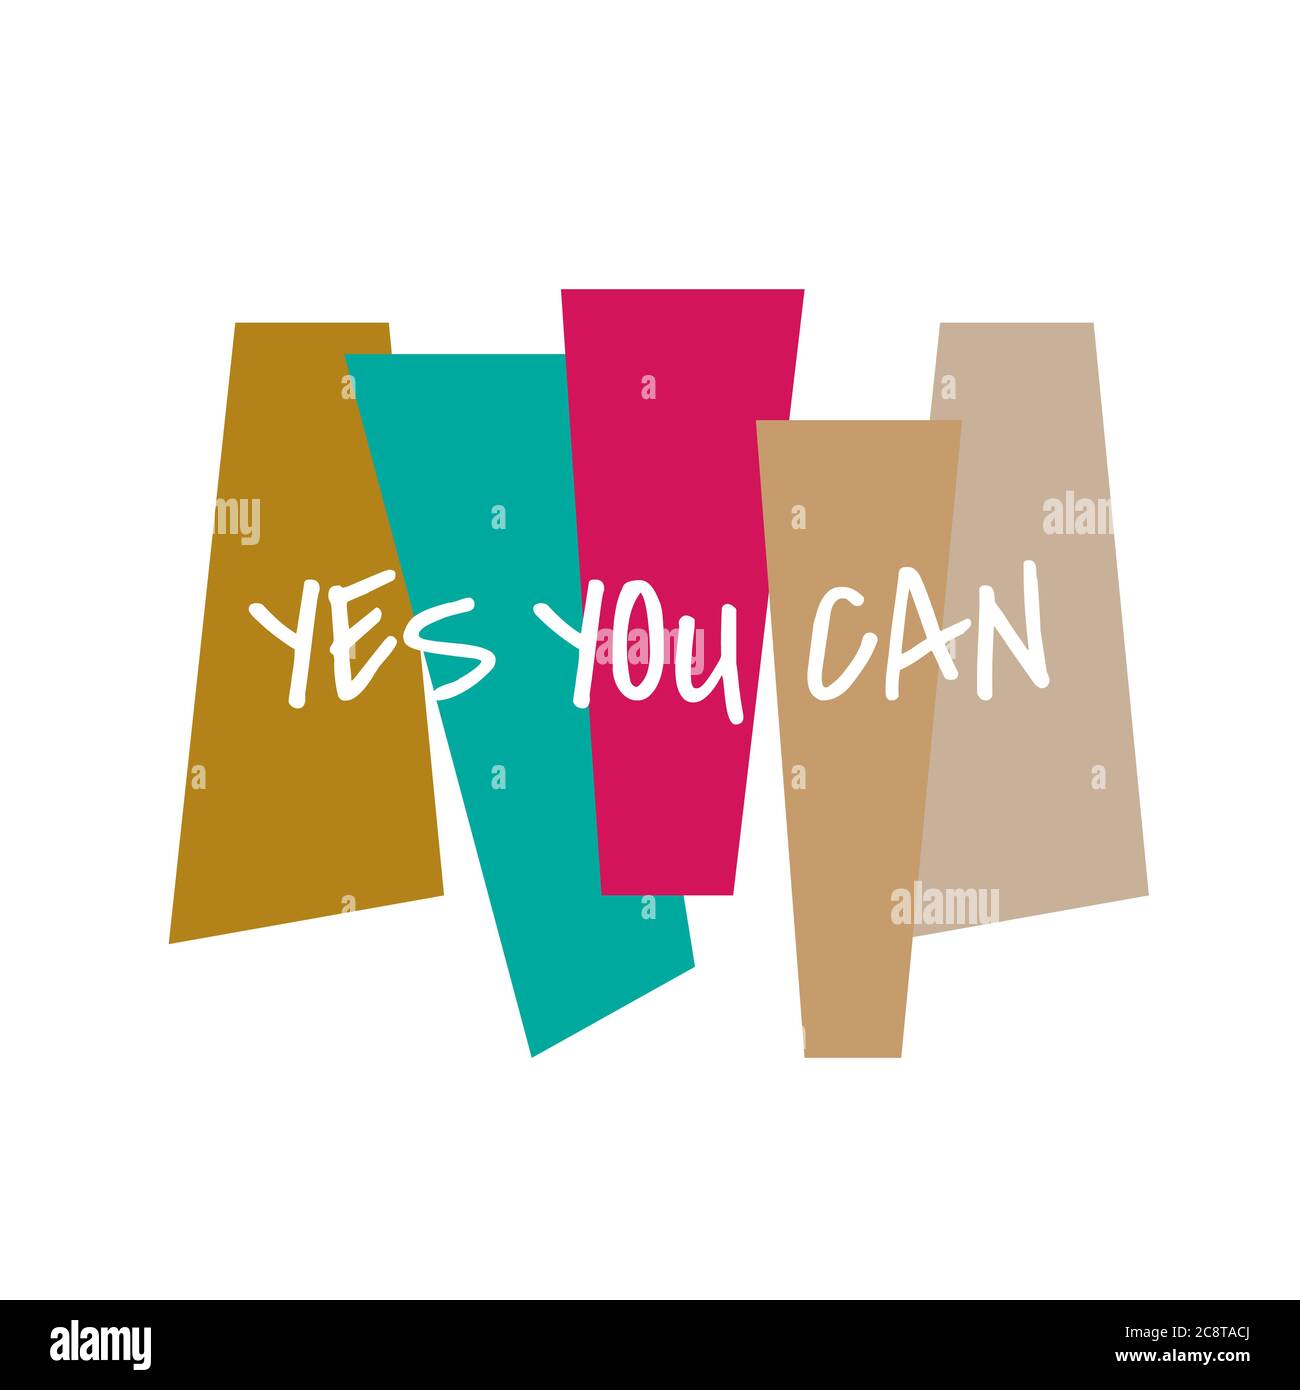 https://c8.alamy.com/comp/2C8TACJ/new-custom-creative-inspiring-positive-quotes-yes-you-can-motivation-quote-vector-typography-banner-design-concept-on-square-shape-block-background-2C8TACJ.jpg